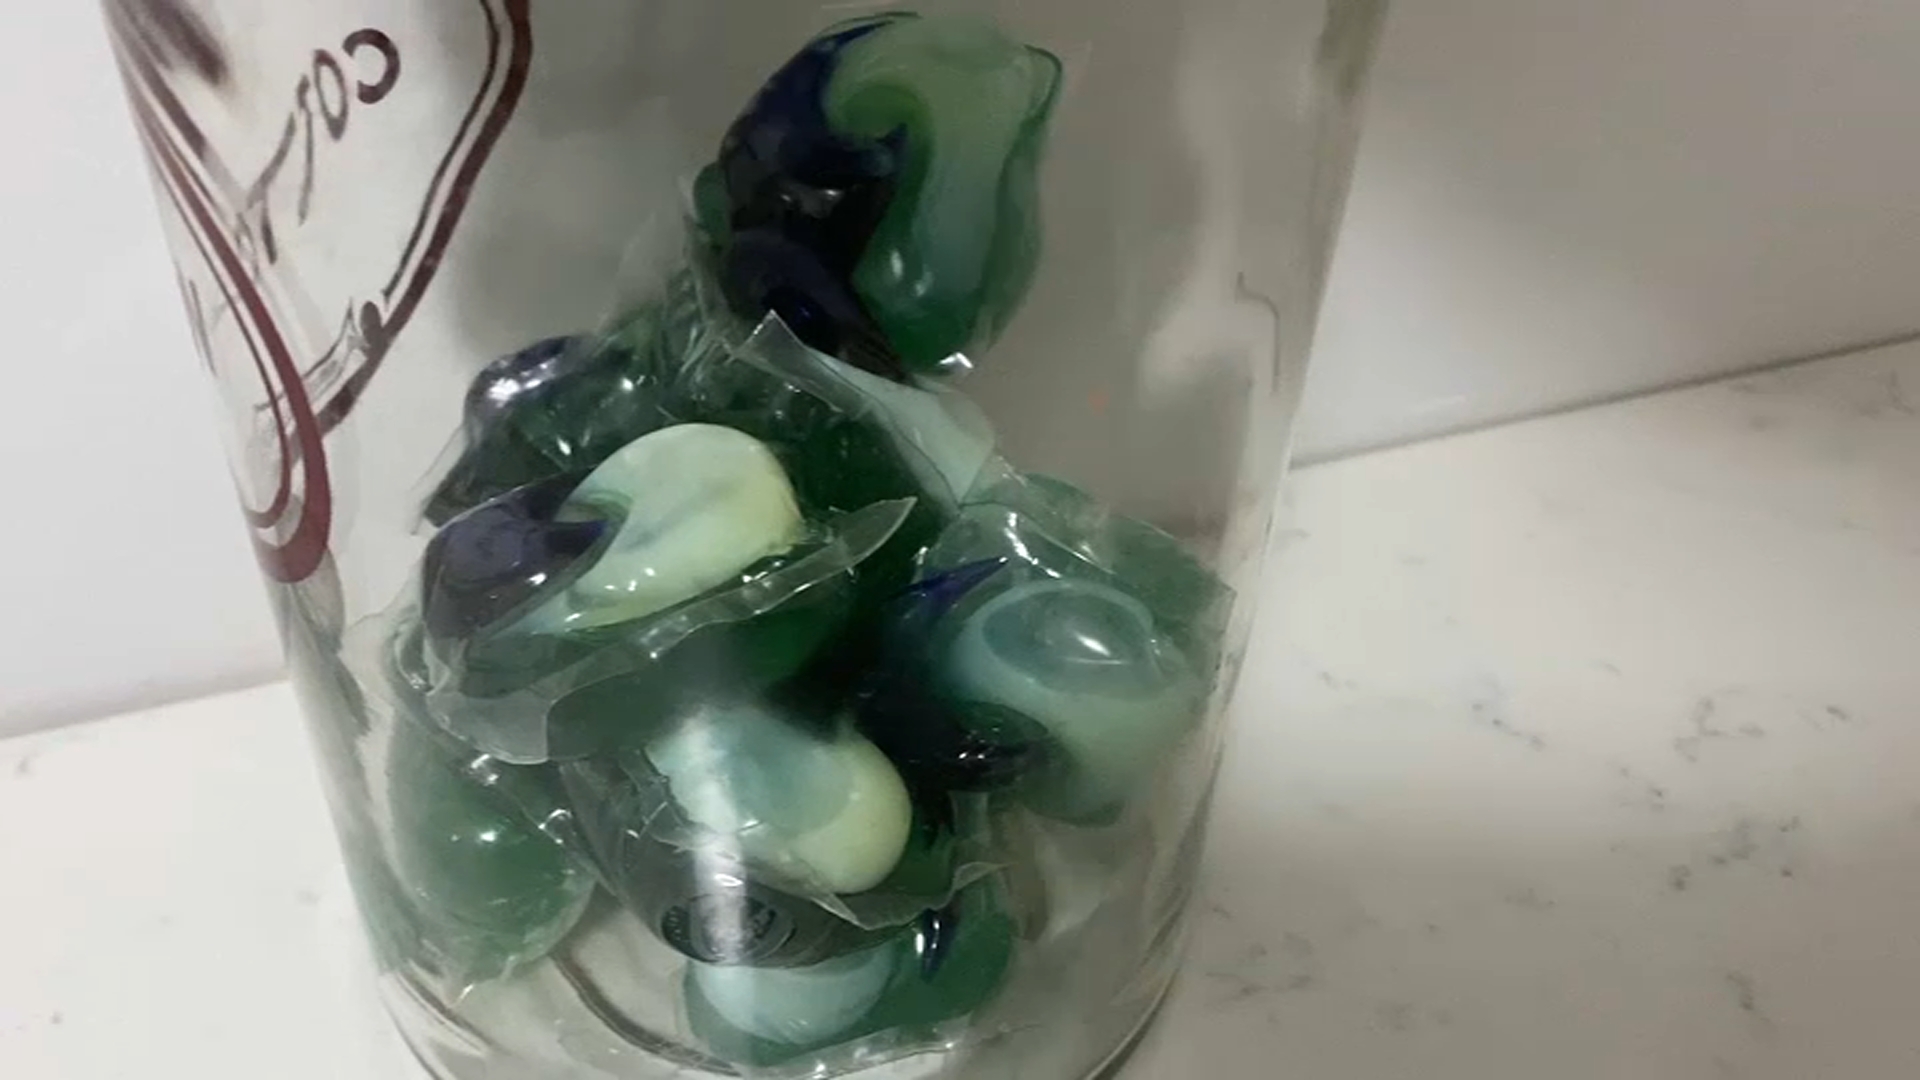 Storing Laundry Detergent Pods, Powder, and Liquid in Glass Jars